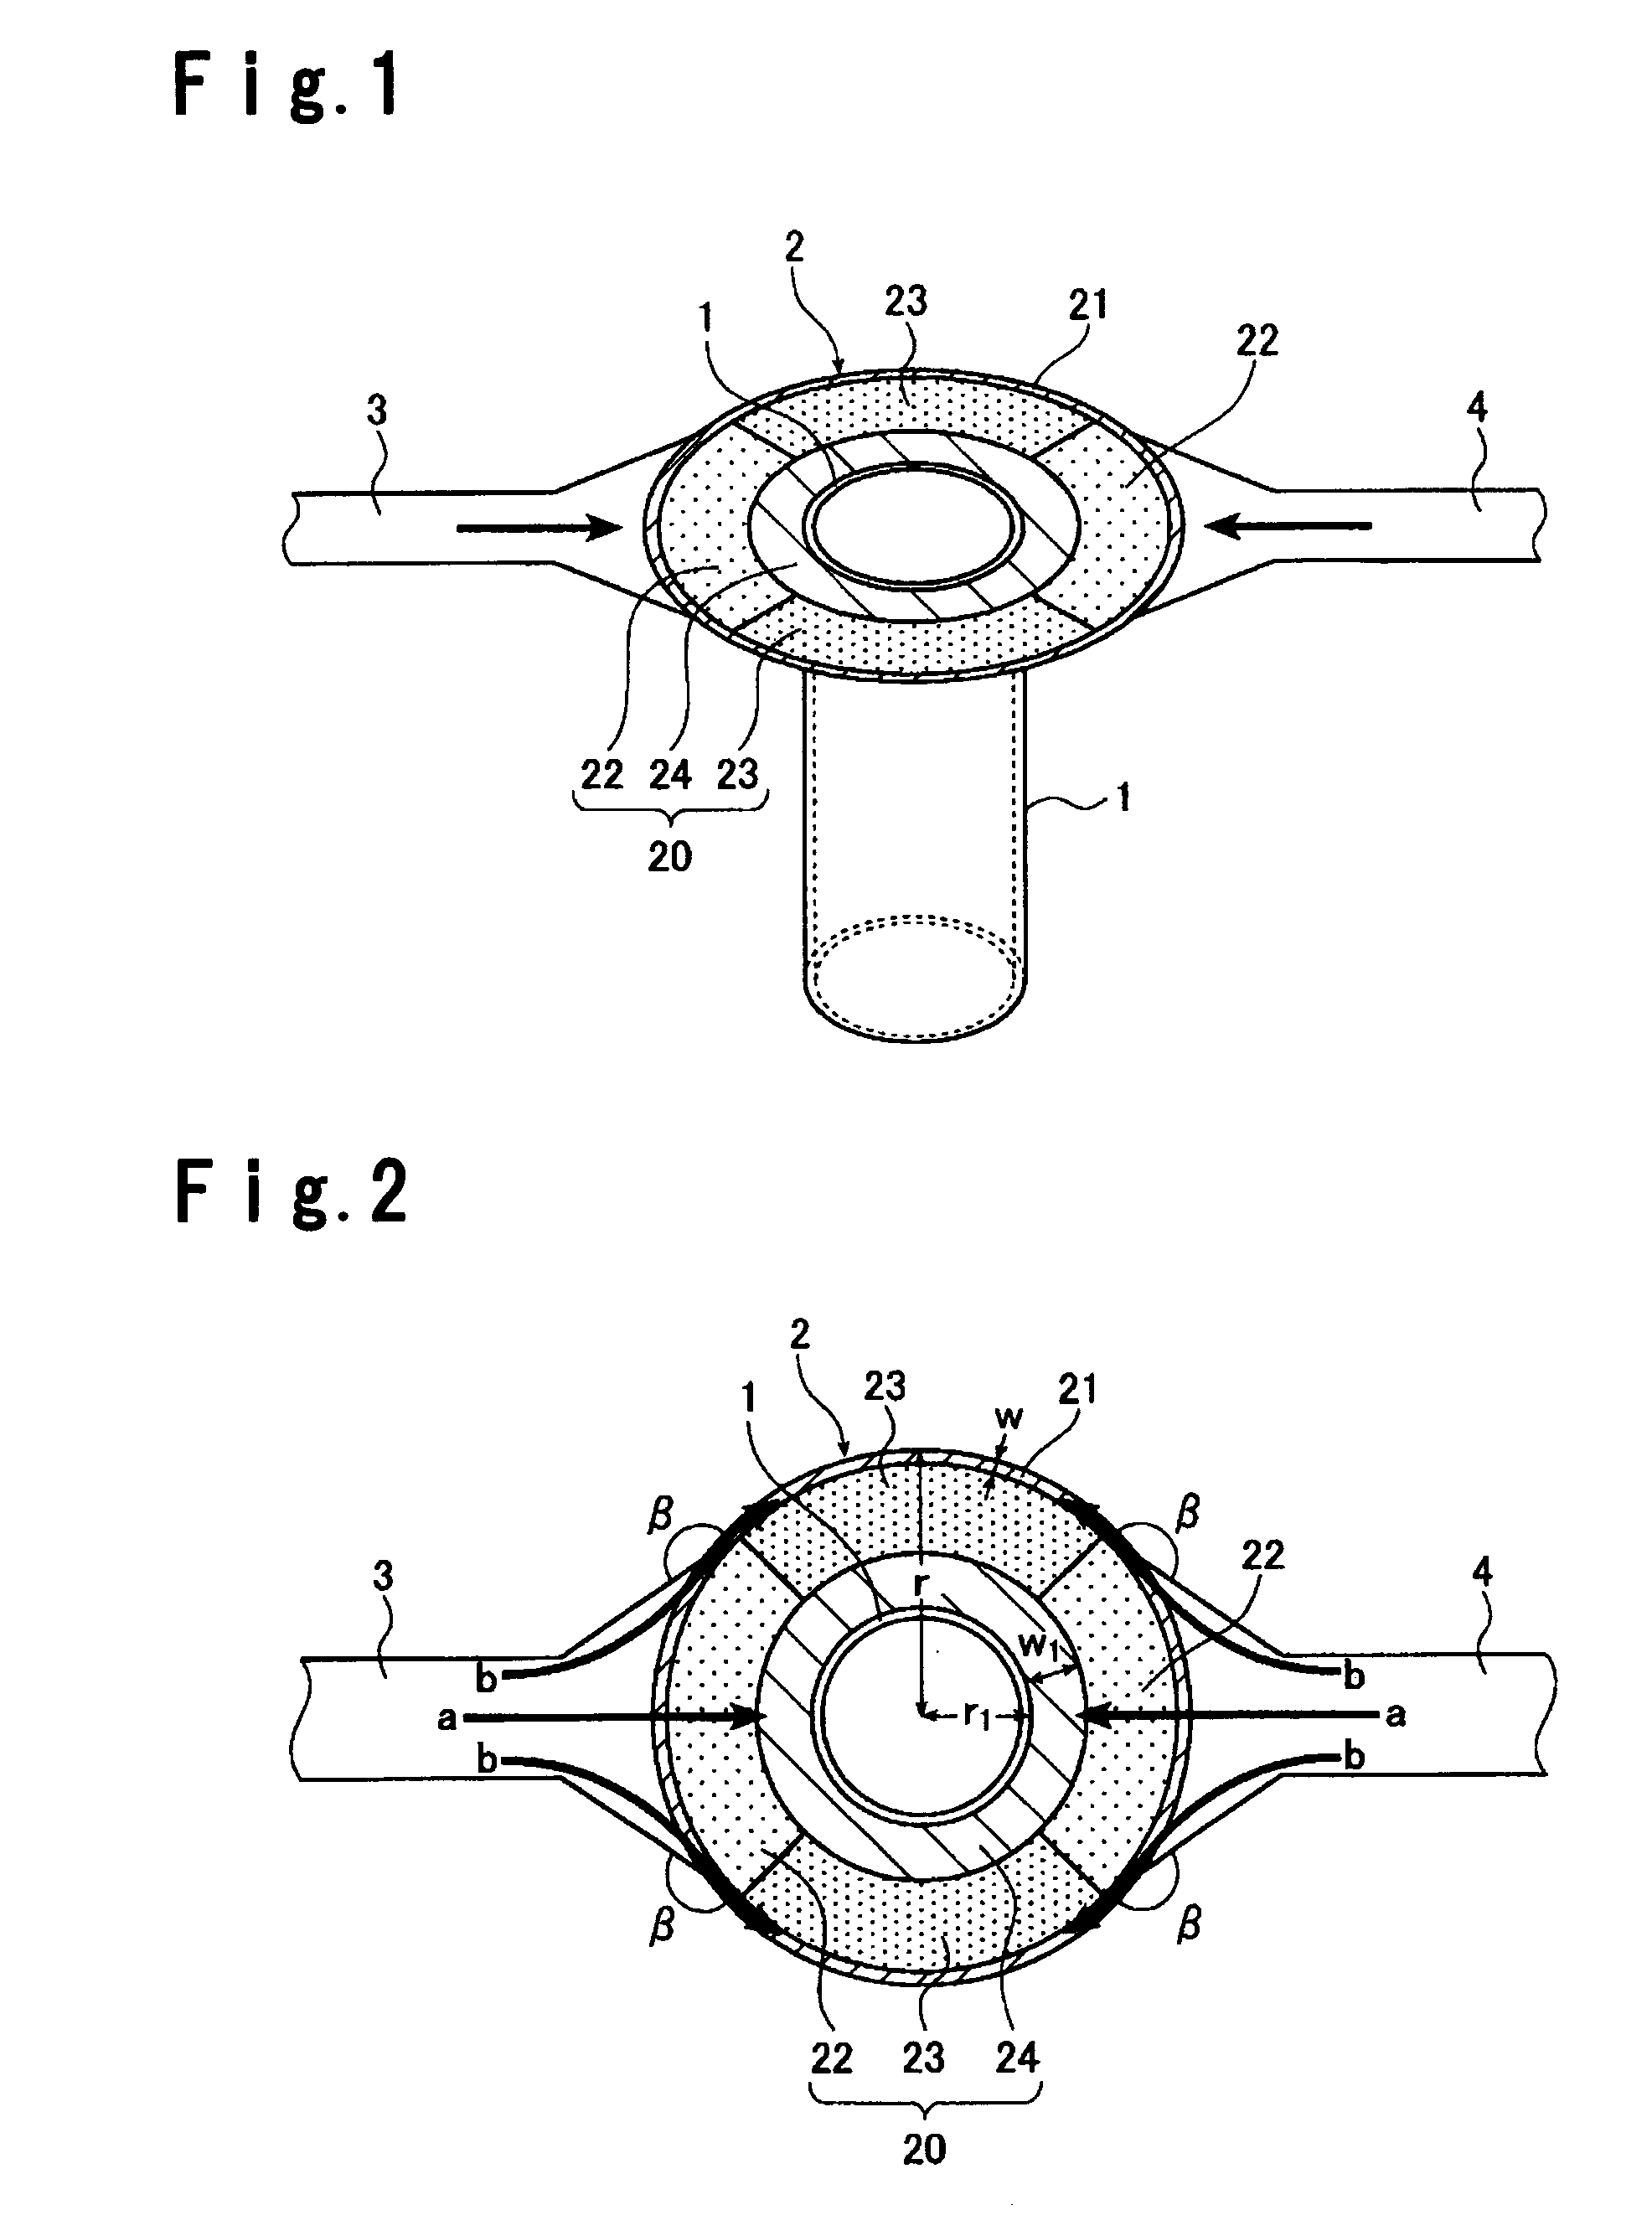 Glass manufacturing apparatus and a structural member thereof